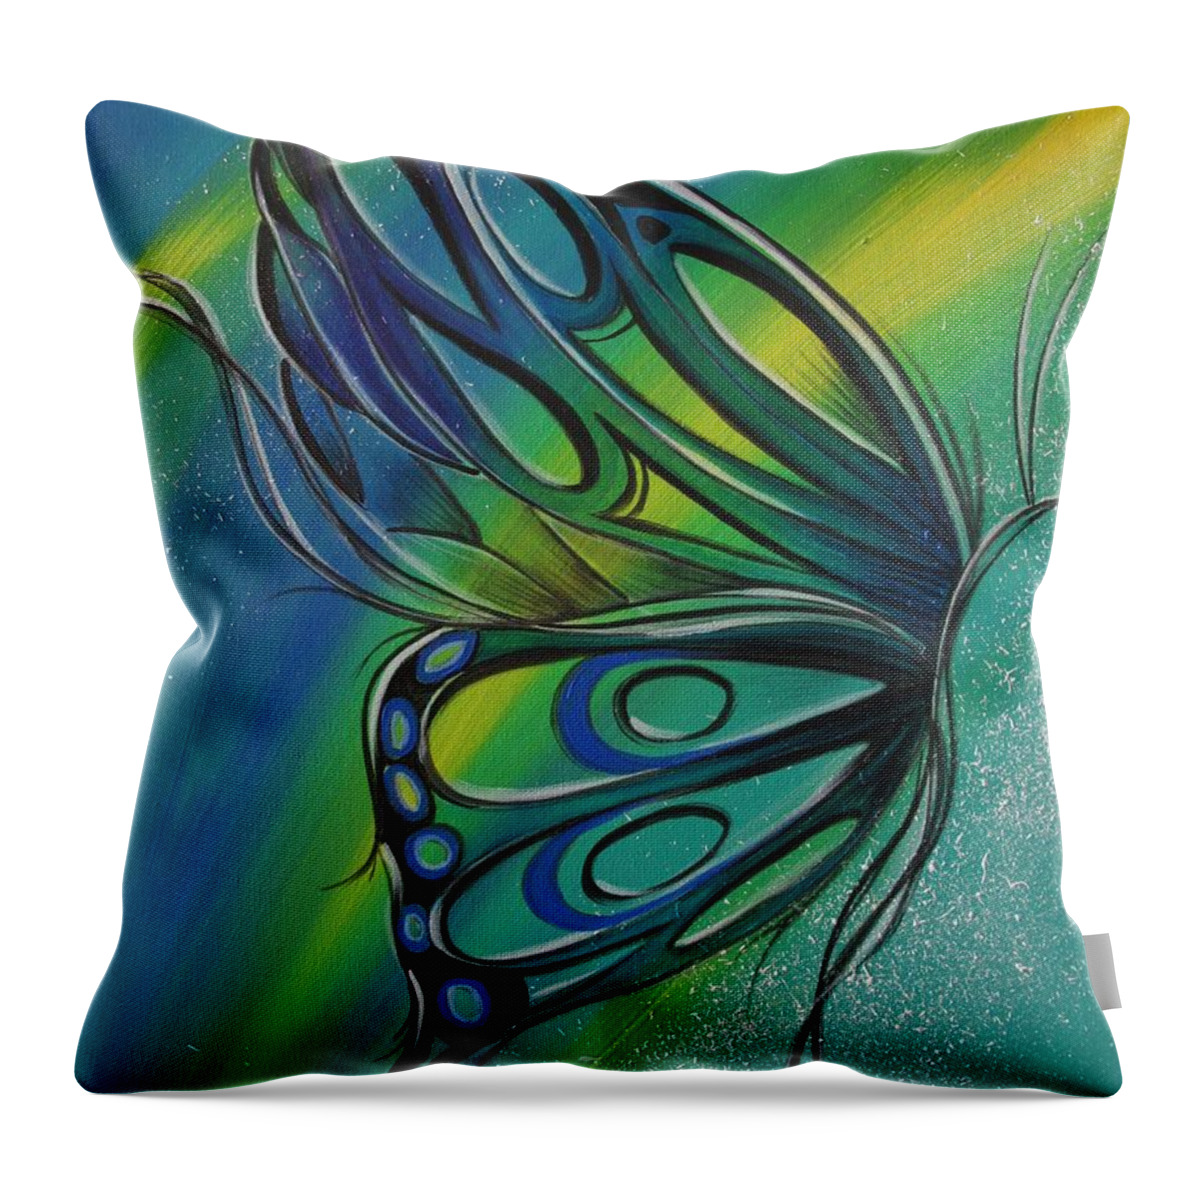 Reina Throw Pillow featuring the painting Butterfly 1 by Reina Cottier